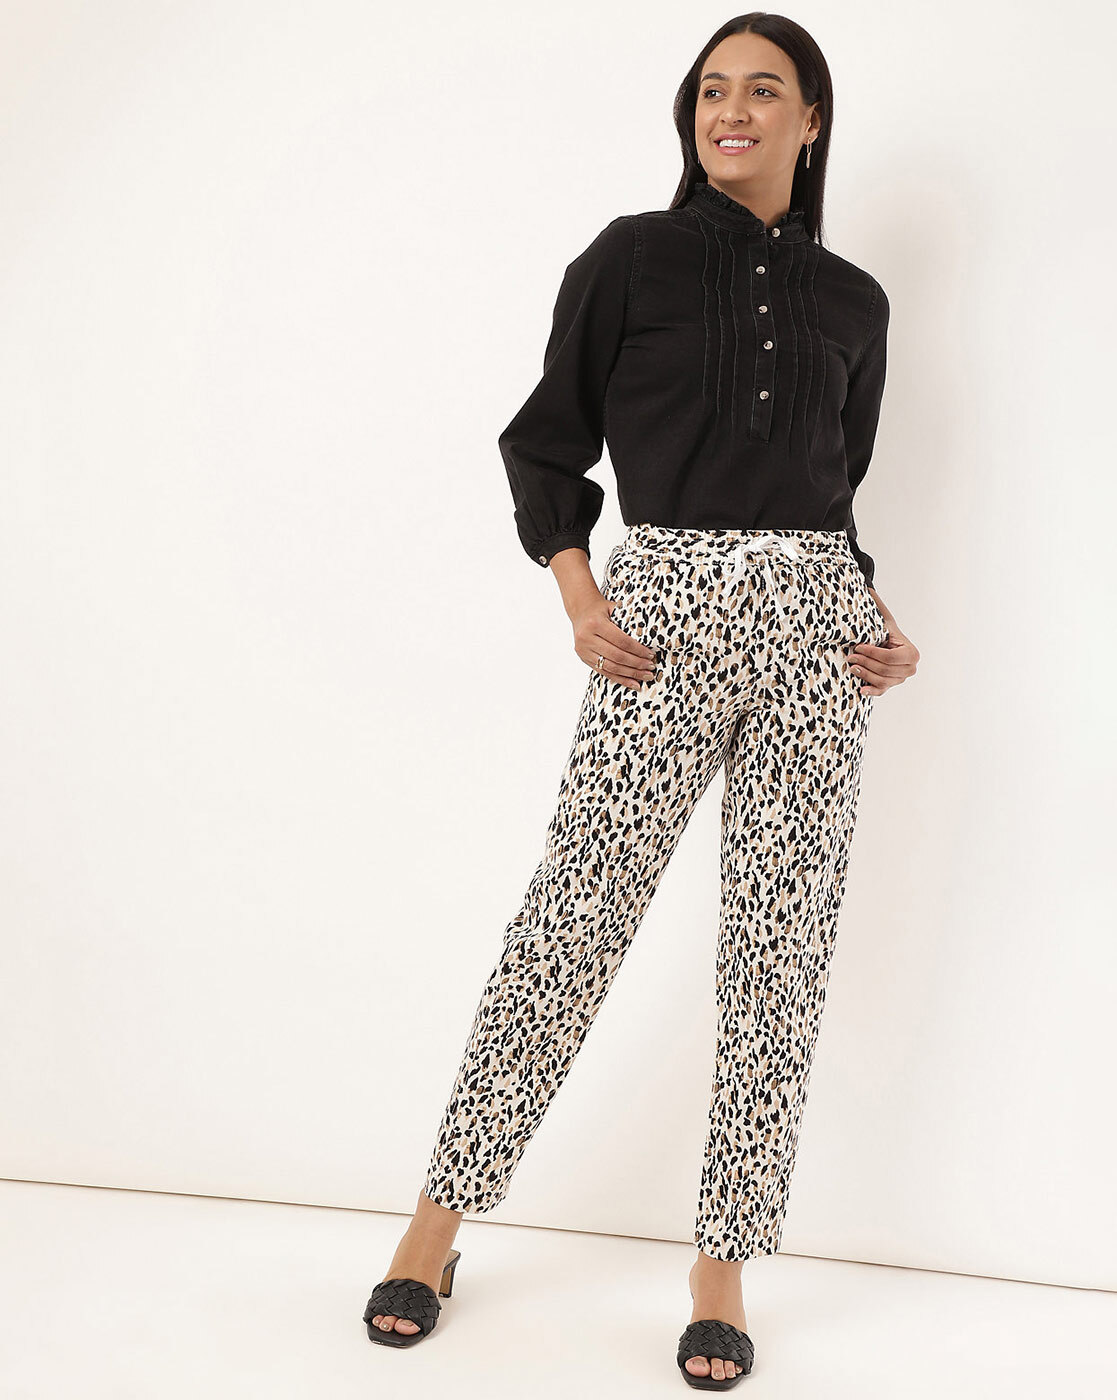 Brown Leopard Print Casual Woven Trousers  Women  George at ASDA